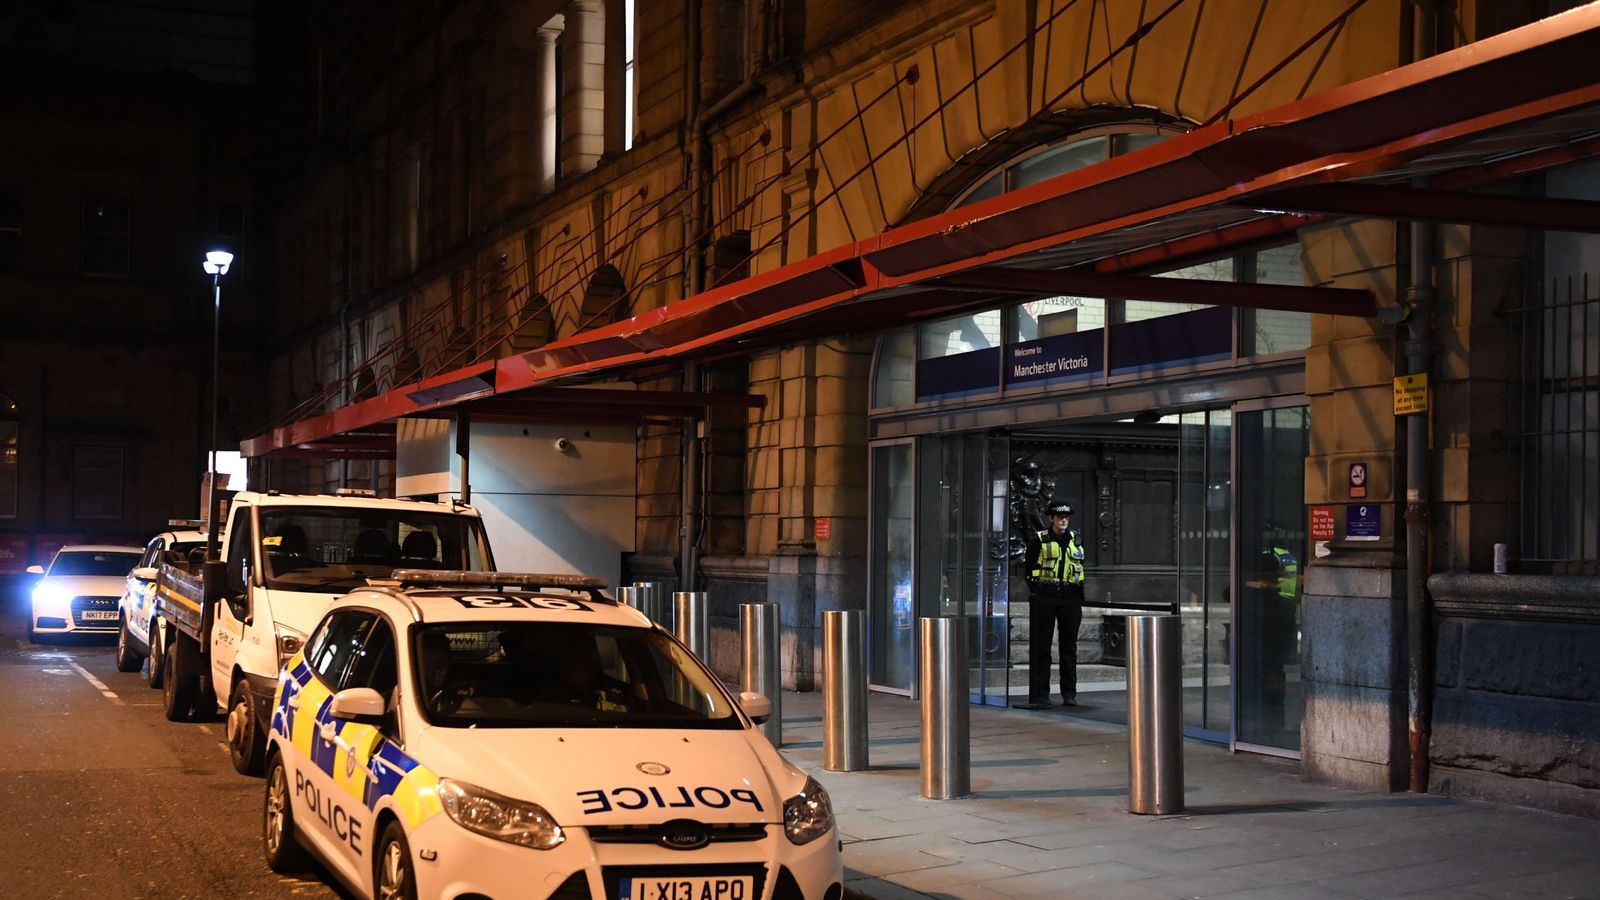 Manchester Victoria station knife attack: Man charged with three